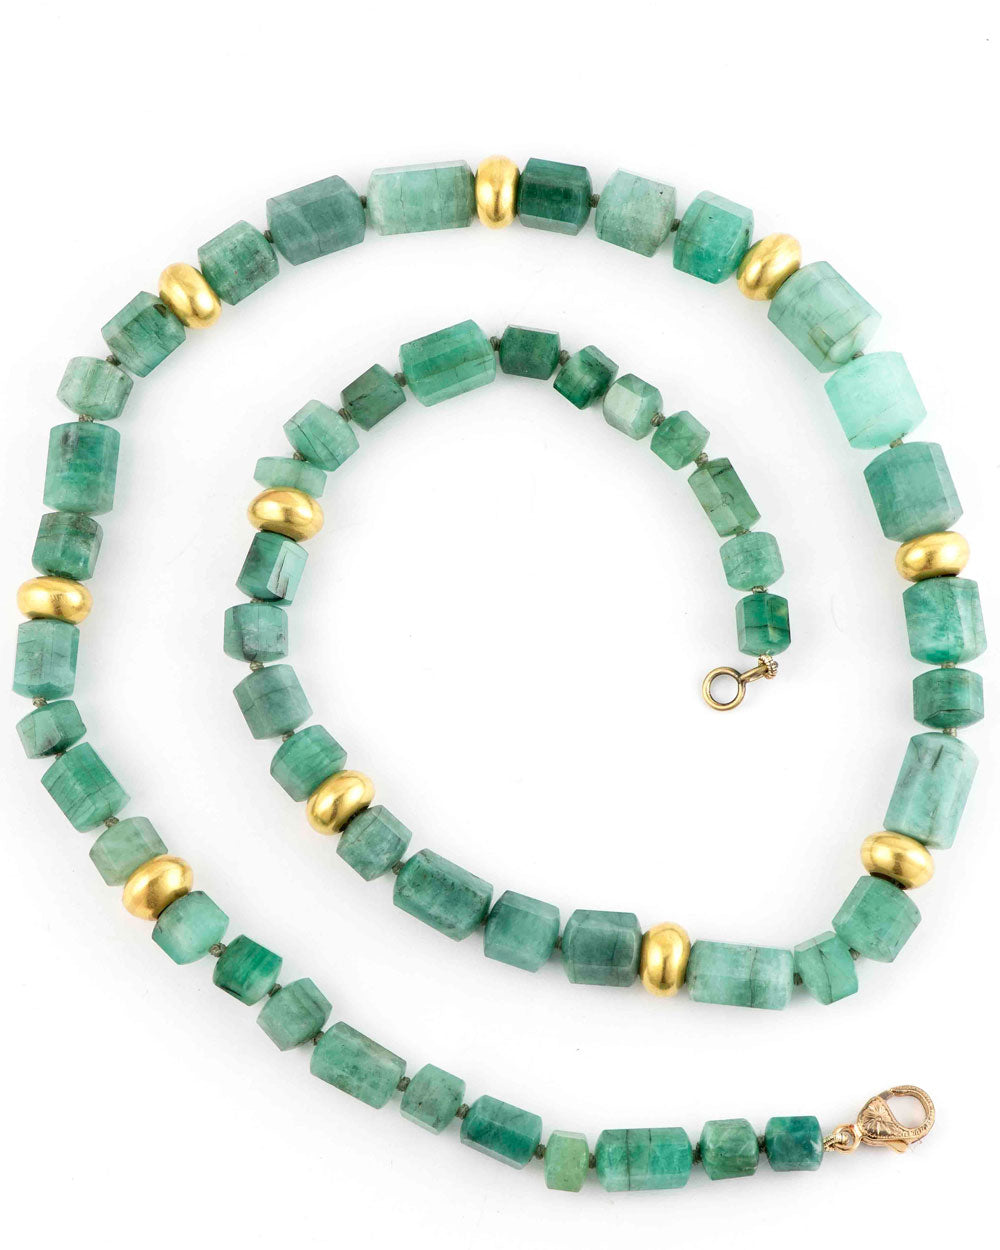 Brazilian Emerald and Gold Bead Necklace